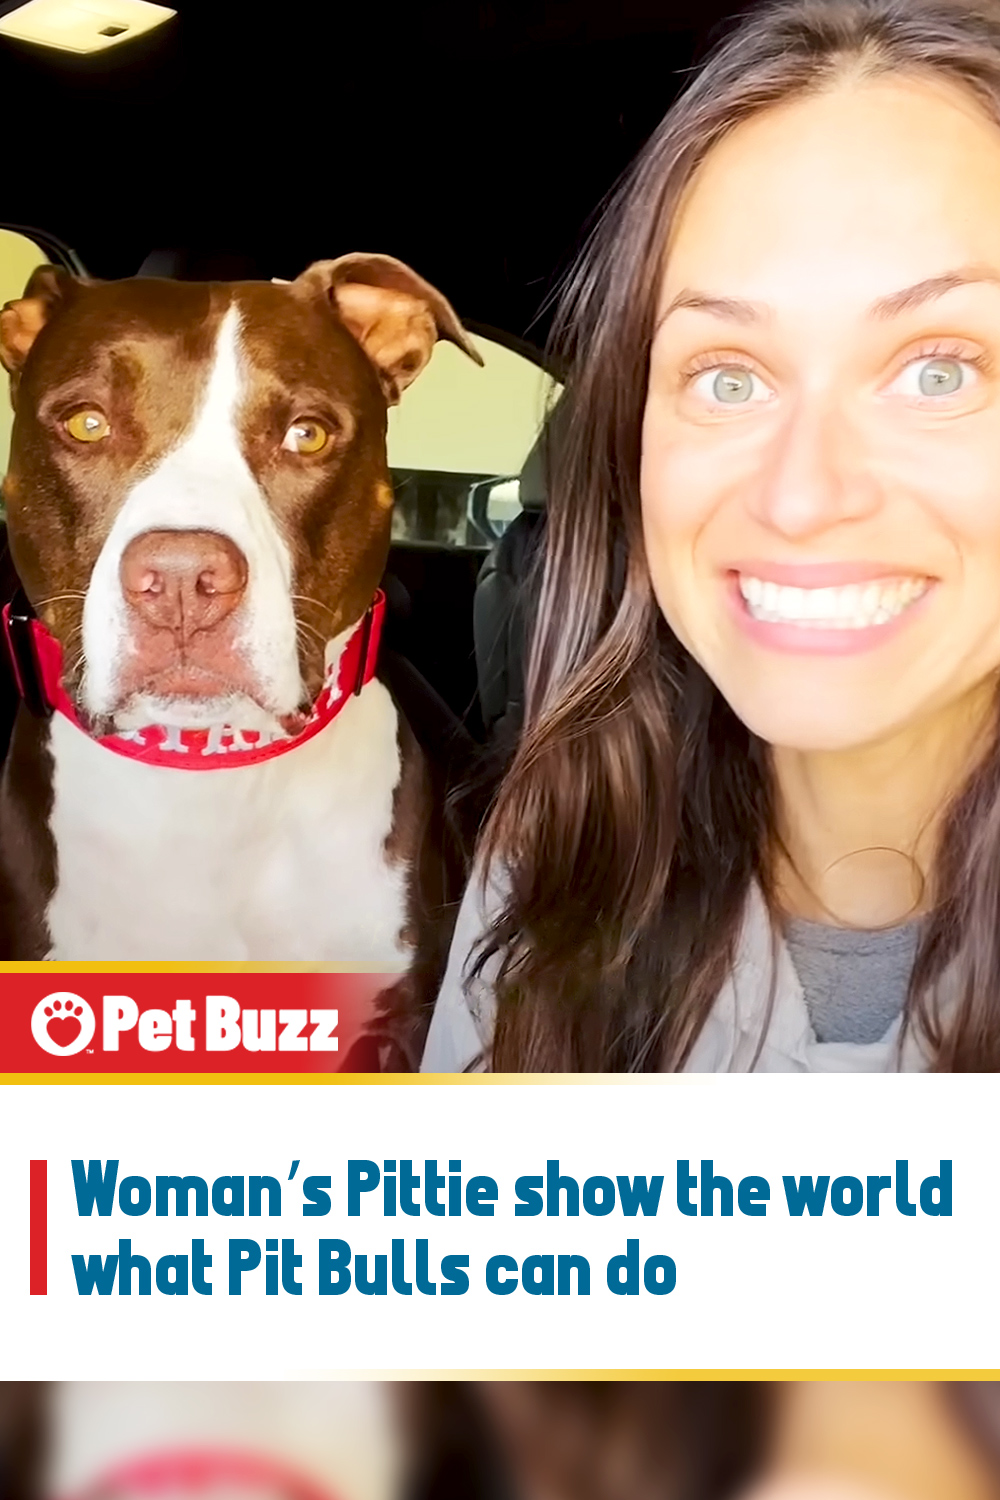 Woman’s Pittie show the world what Pit Bulls can do